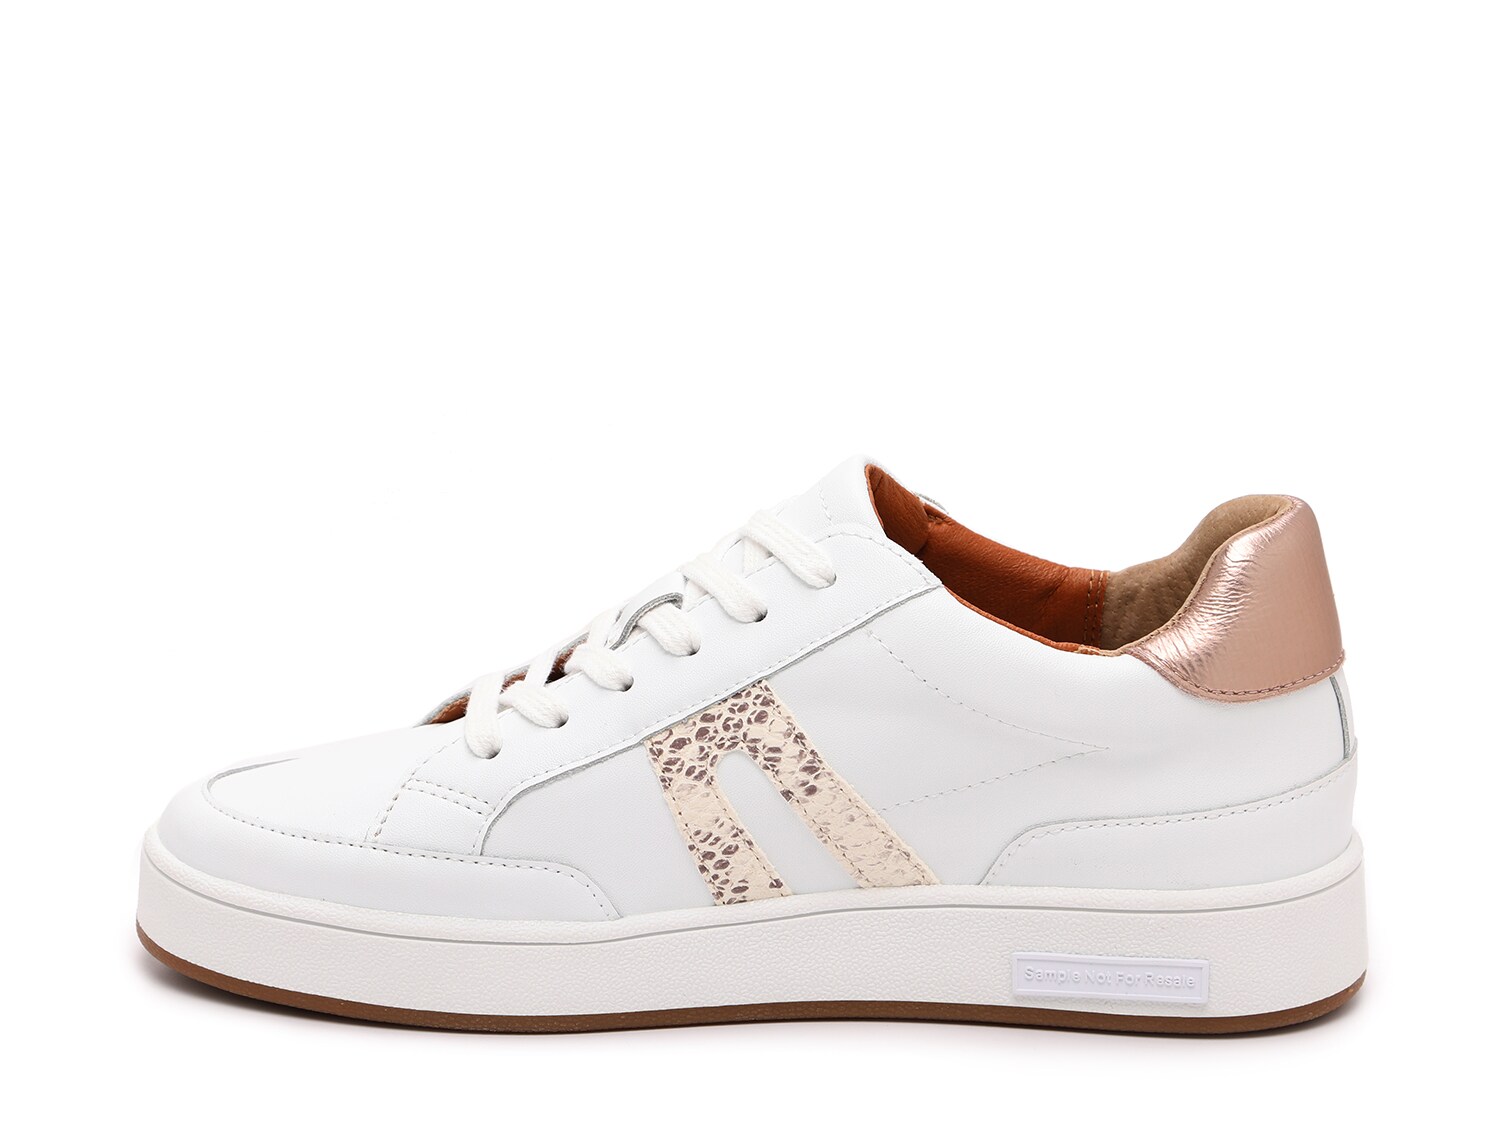 lucky brand sneakers dsw